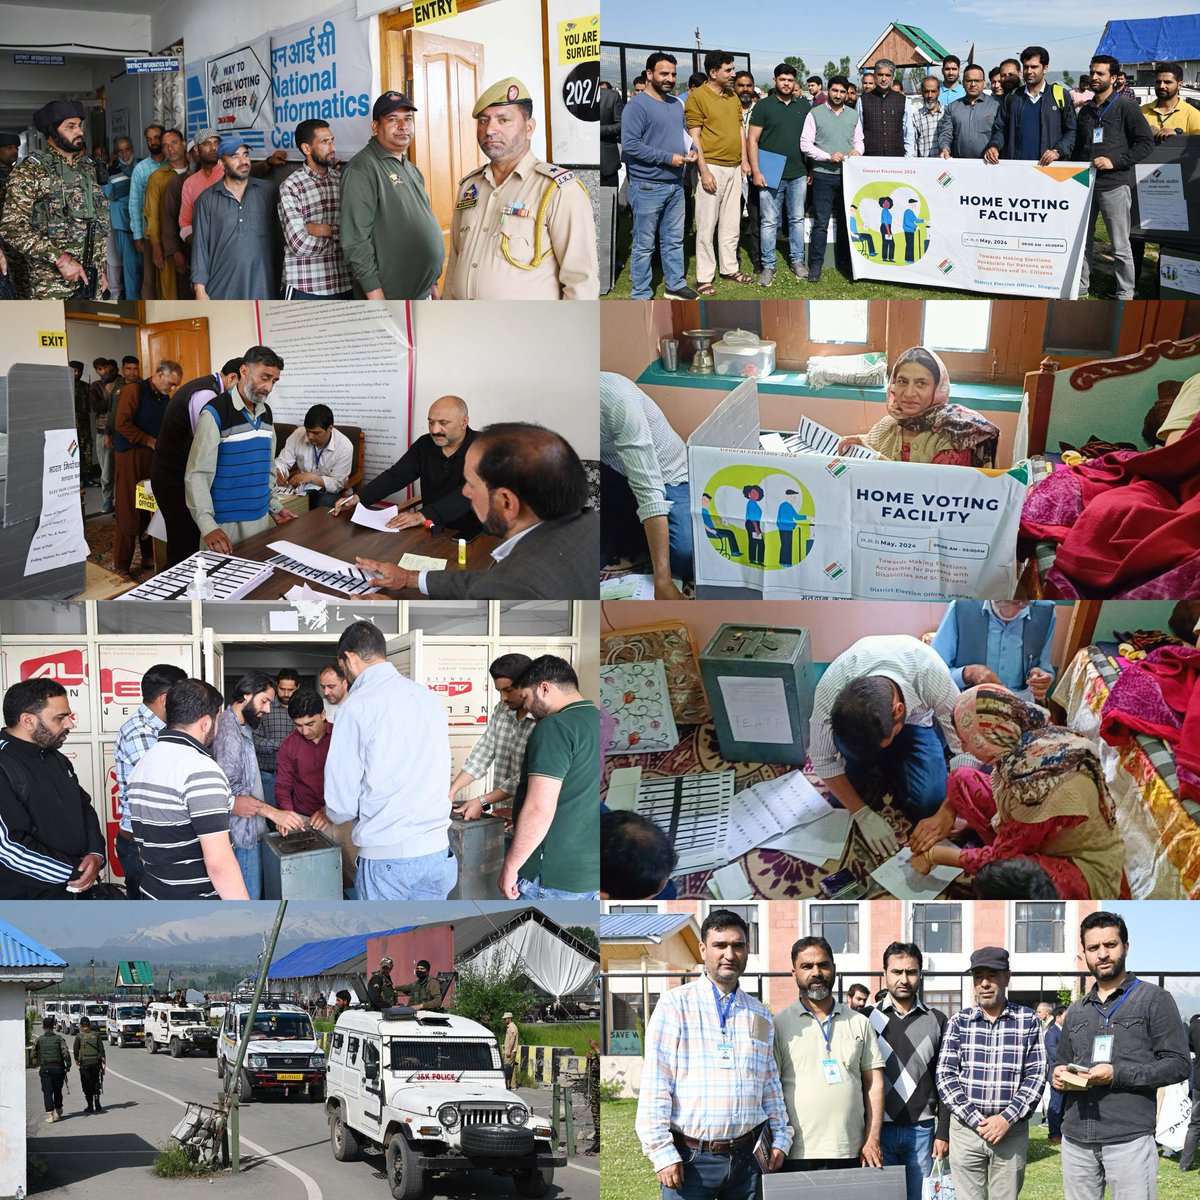 To ensure participation of eligible voters,Postal Ballot Voting/Home voting under the Absentee voters of Essential Services,Senior Citizens and PwDs commenced today across Zainapora AC of the Anantnag Rajouri PC. @SpokespersonECI @diprjk @ceo_UTJK @FazLulhaseeb @ddnewsSrinagar